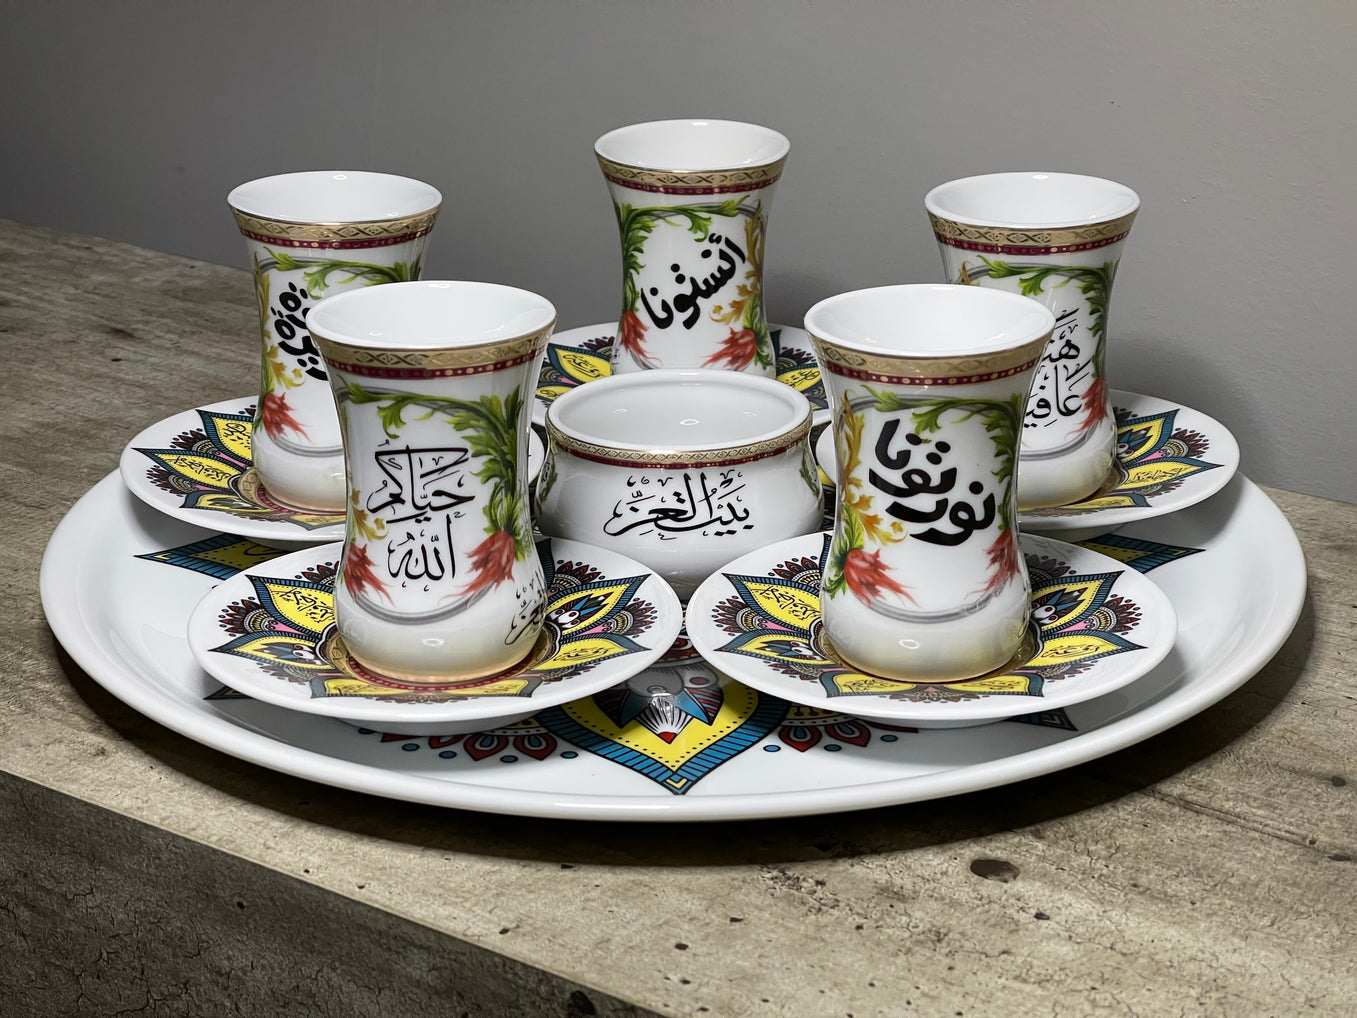 Turkish Coffee set with Tray (14pcs) - 'Welcoming'